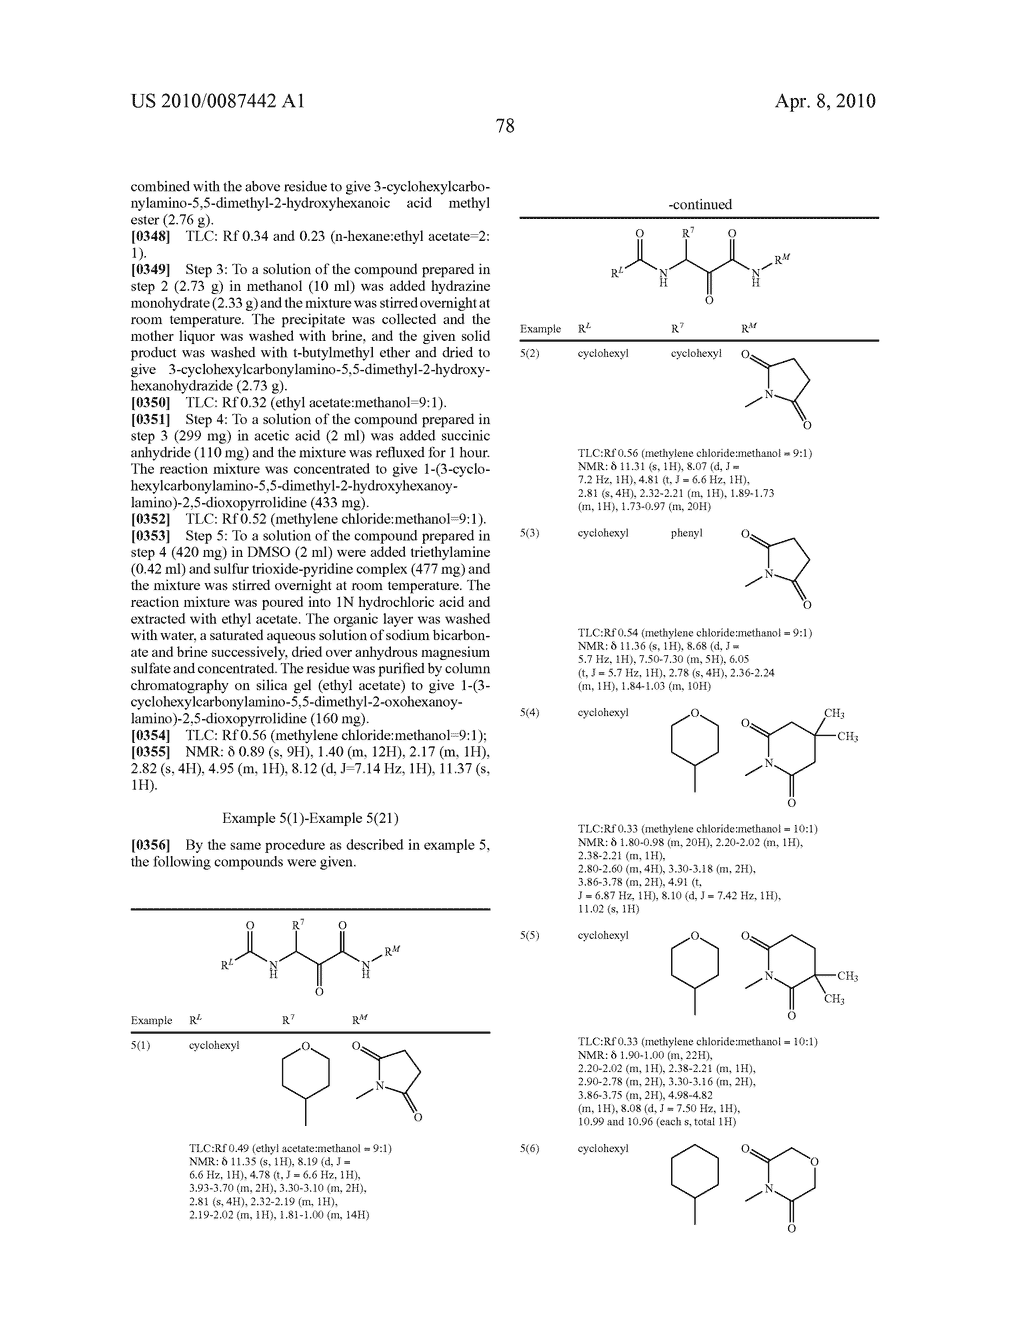 DIKETOHYDRAZINE DERIVATIVE COMPOUNDS AND DRUGS CONTAINING THE COMPOUNDS AS THE ACTIVE INGREDIENT - diagram, schematic, and image 79